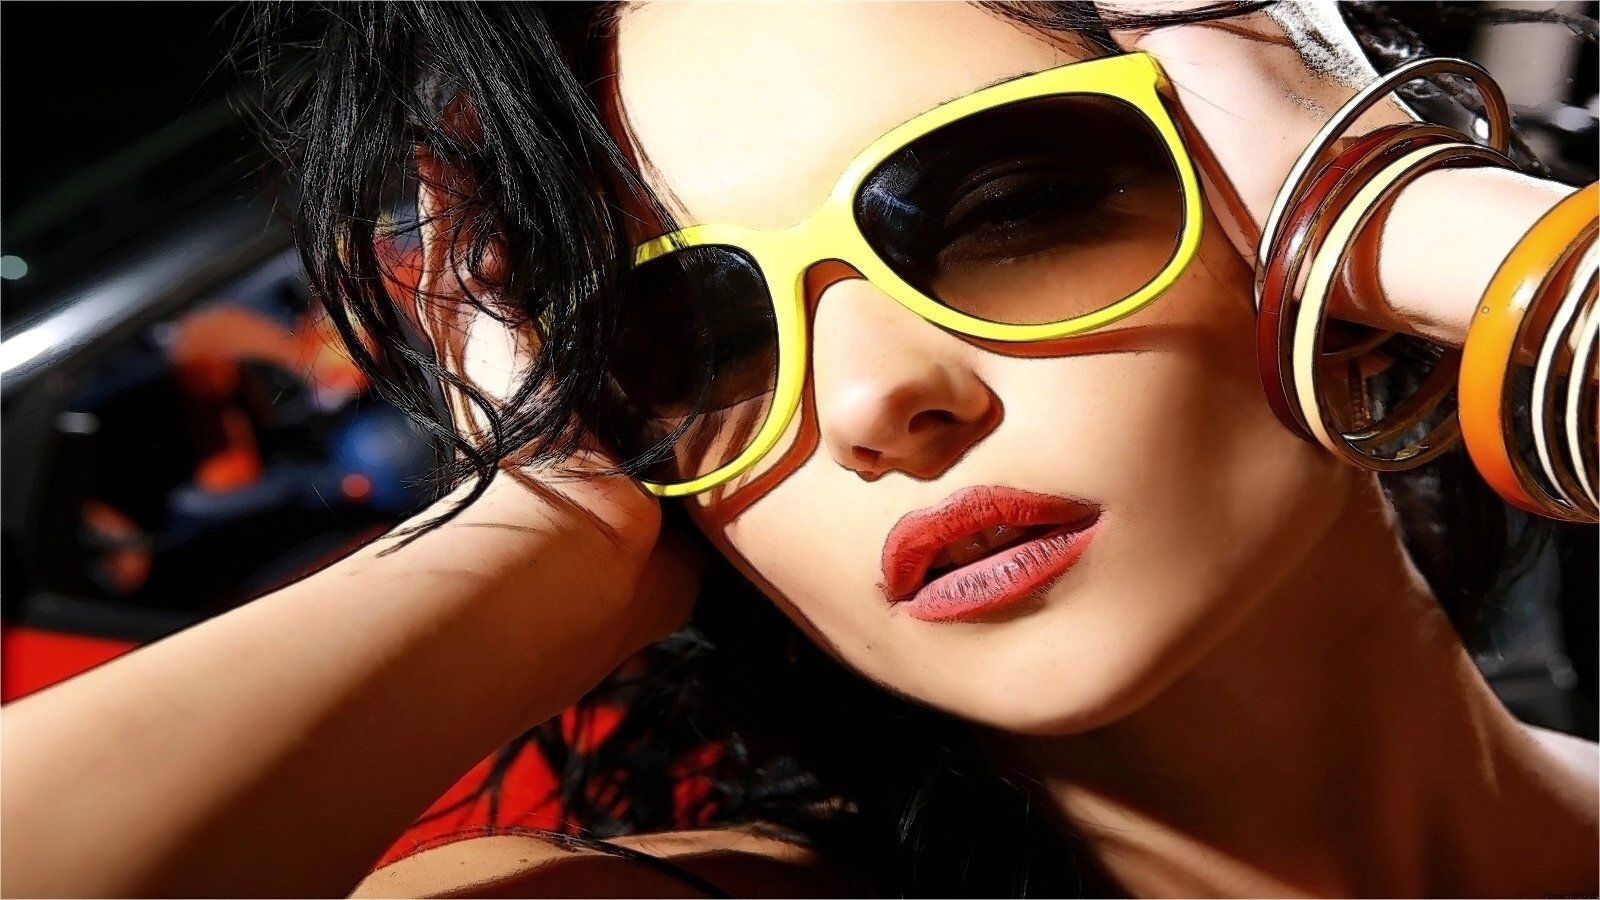 Jenya Sunglasses Compo Wallpaper And Background Imagex900